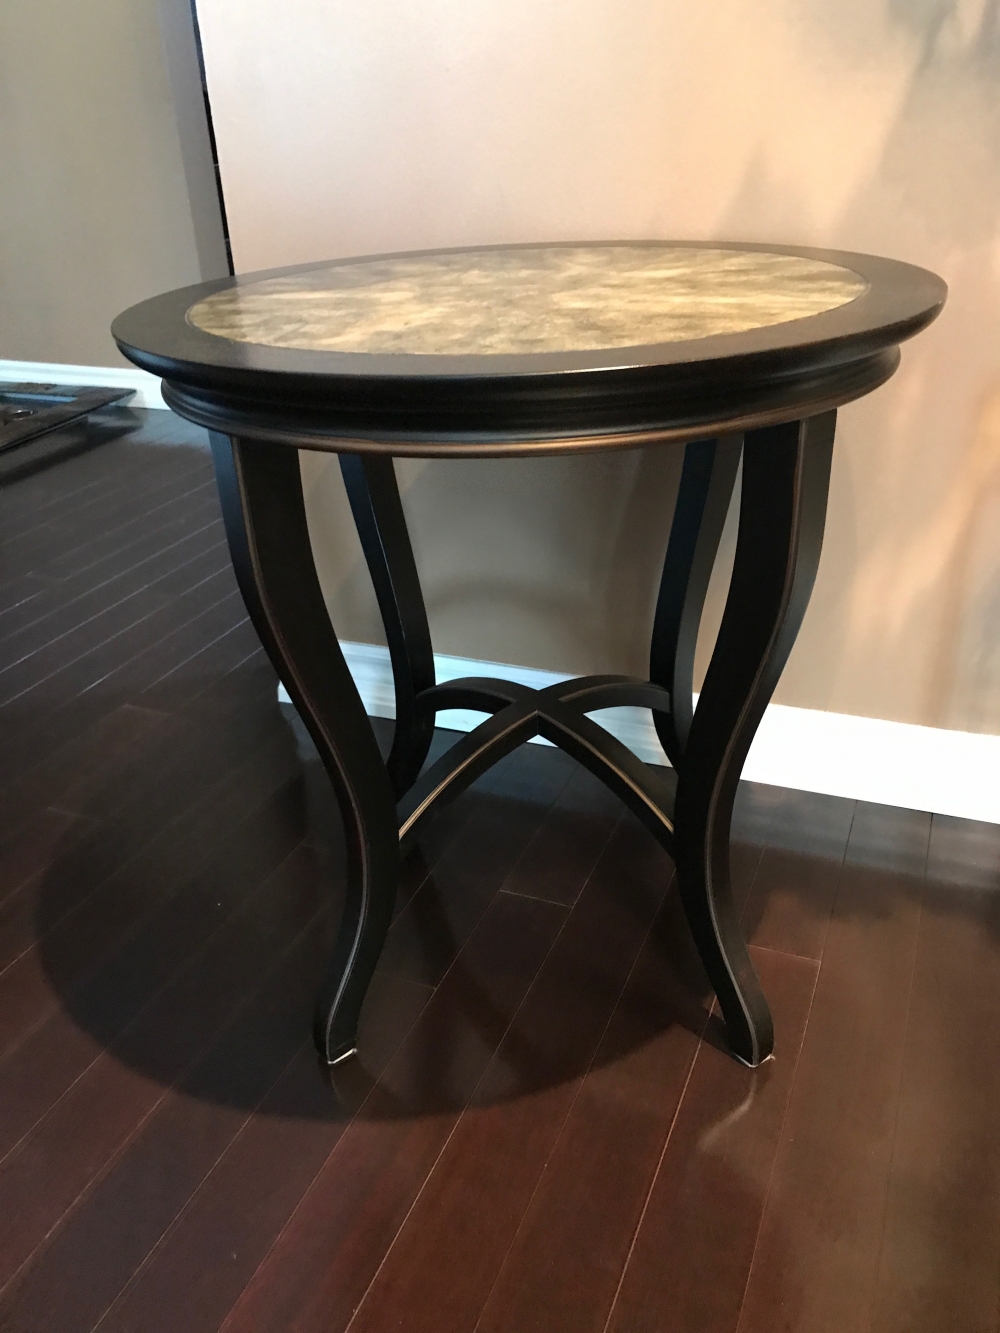 small accent table nesting tables metal tiffany lily lamp teak furniture round dining set large glass and coffee green cherry end living room edmonton rugs target pool chairs